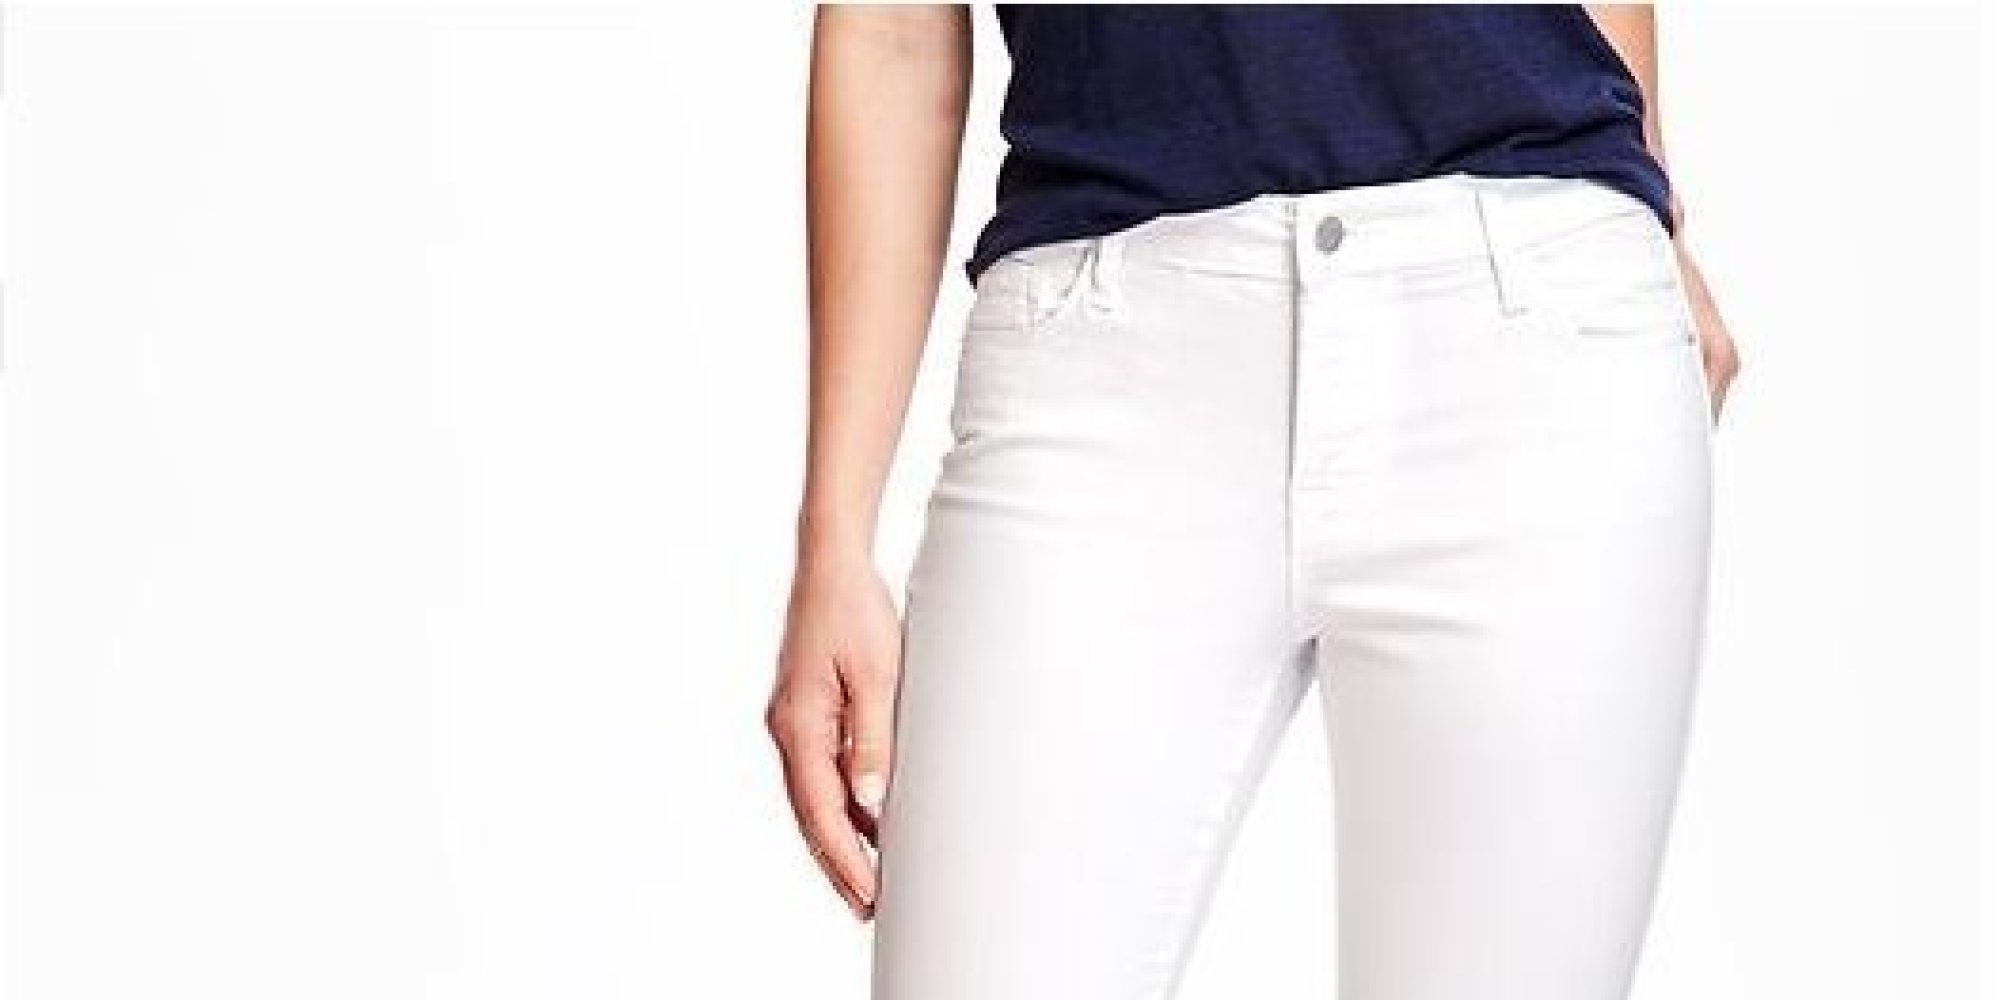 How To Get Stains Out Of White Jeans - Jeans Am